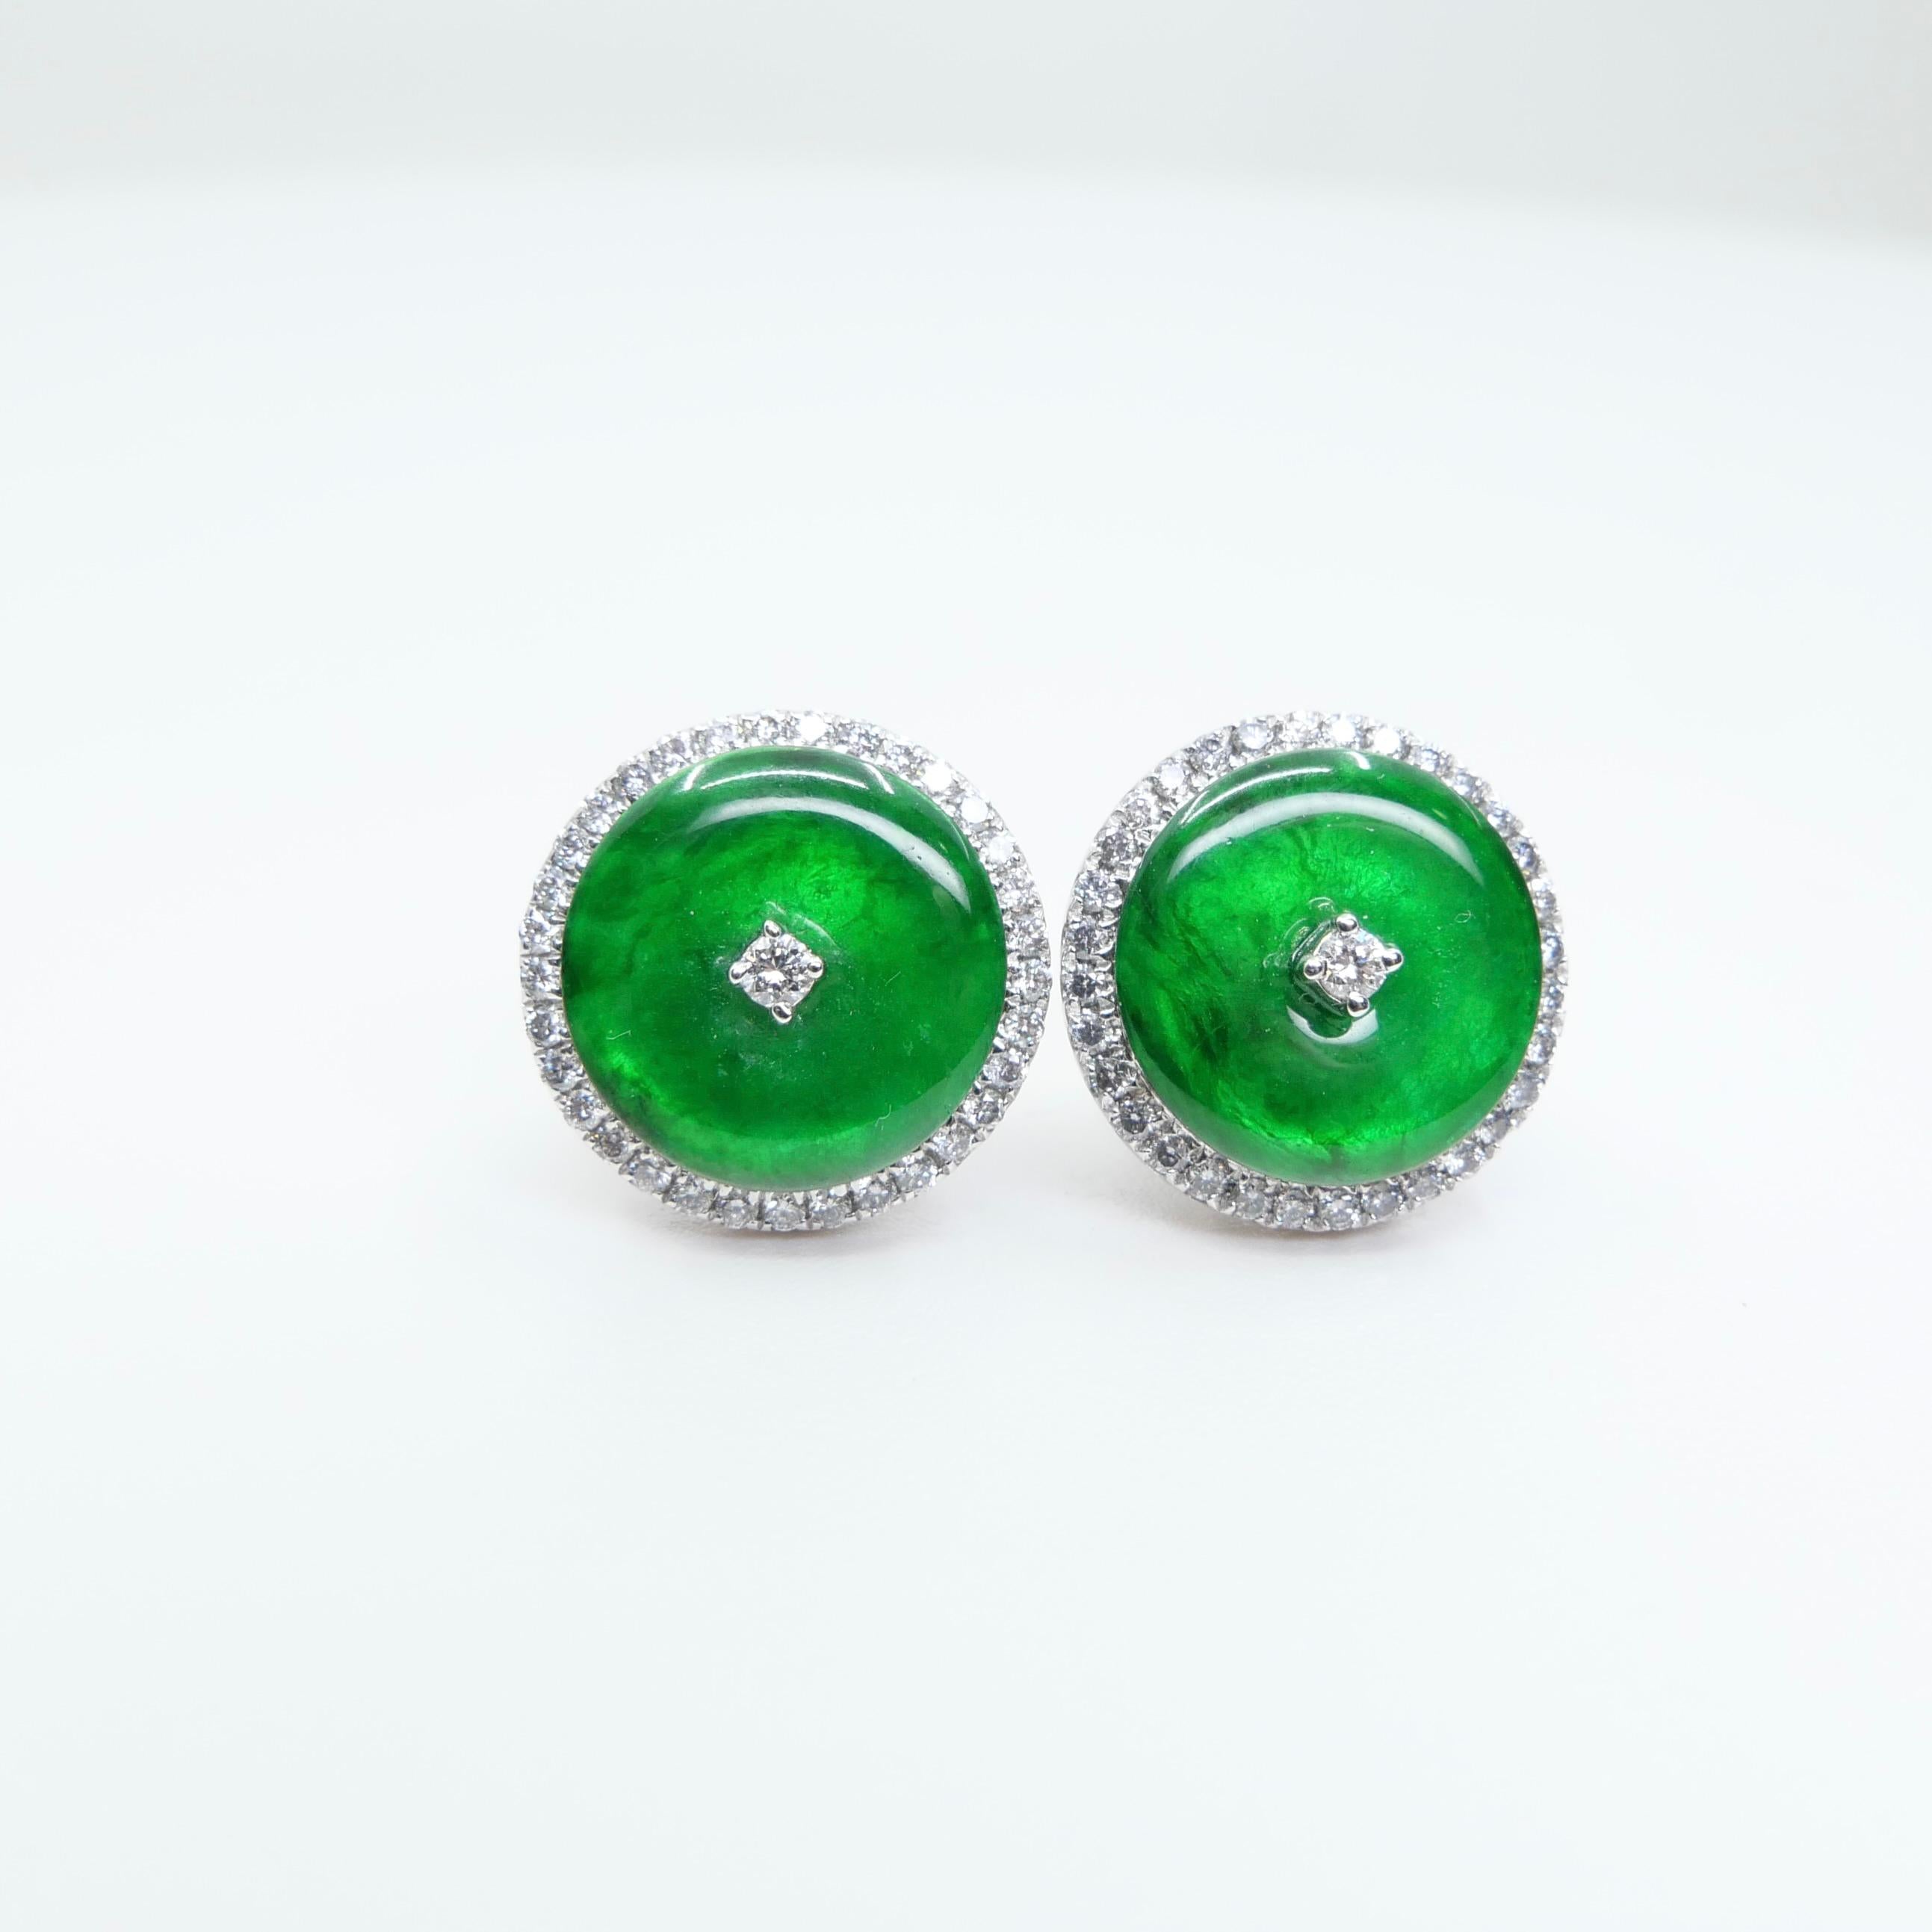 Certified Natural Type A Jadeite Jade And Diamond Earrings. Apple Green Color 2